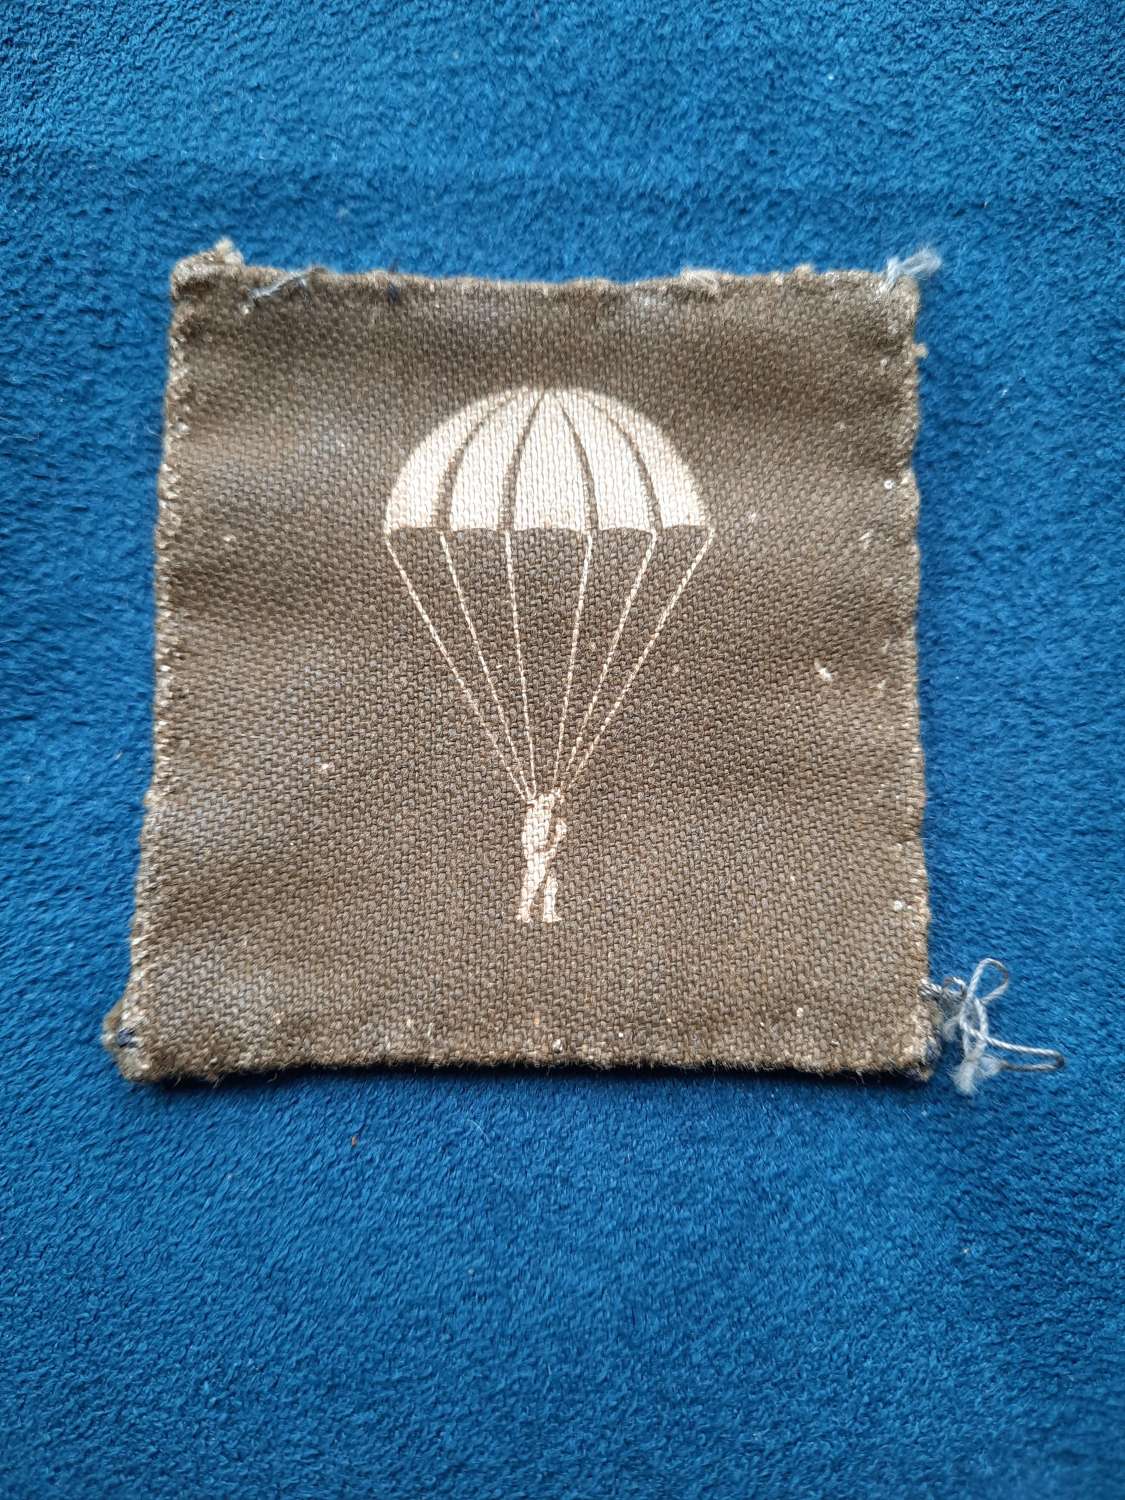 WW2 Parachute Qualification Printed Patch